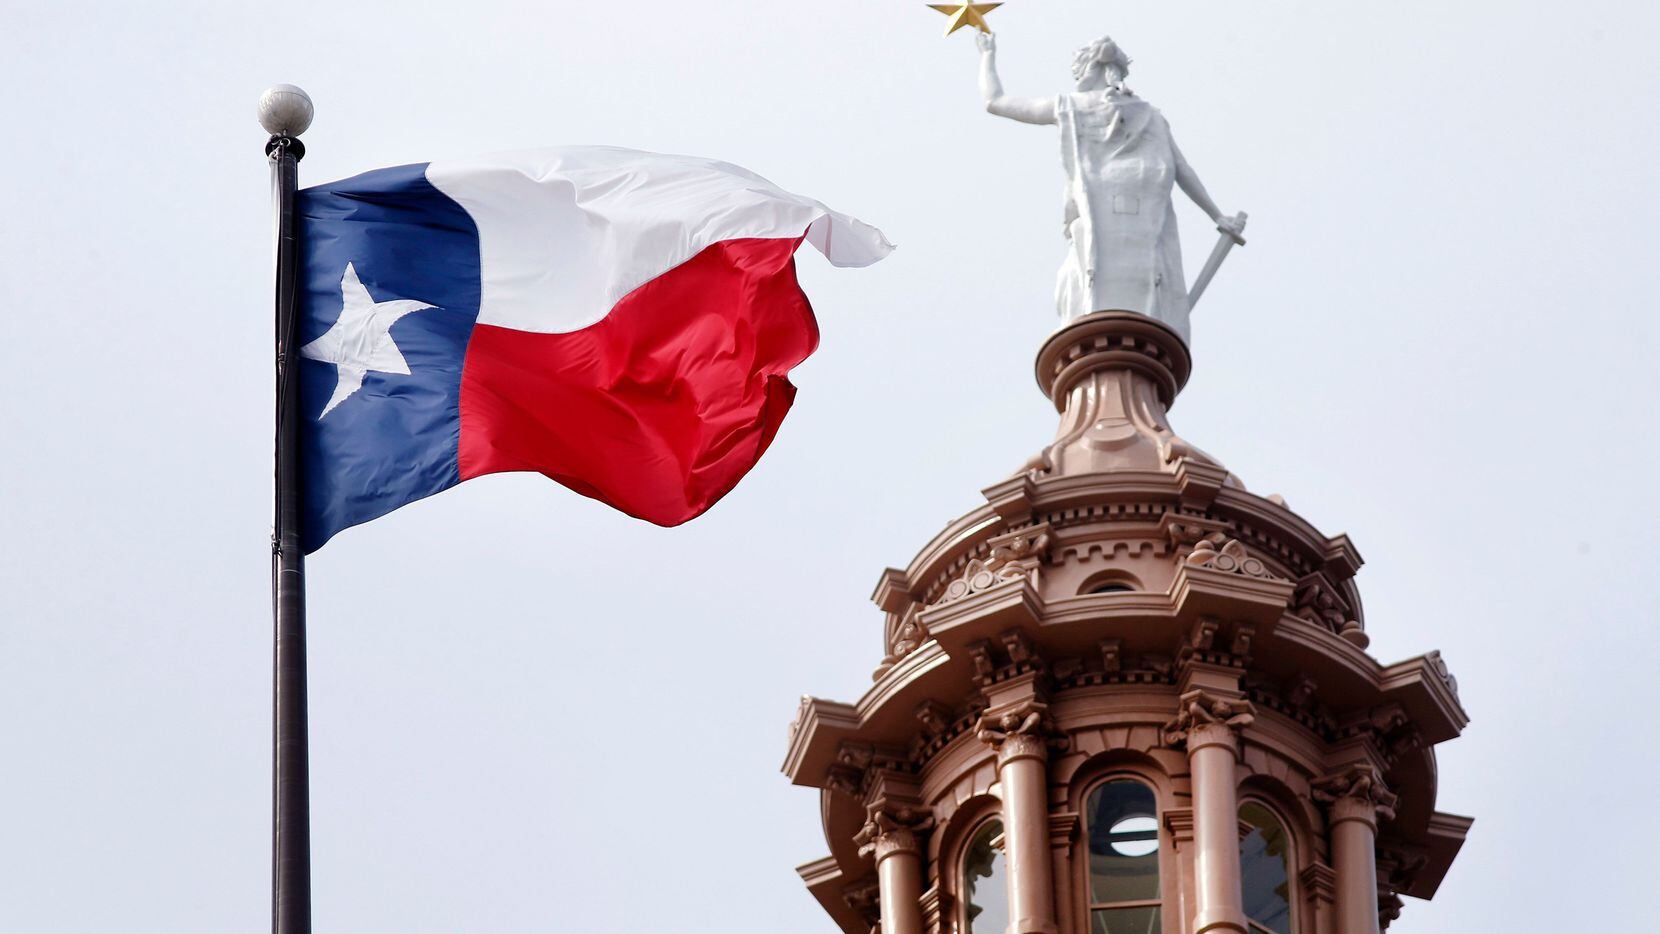 The Texas flag flies over the Texas Capitol in Austin on  May 22, 2019.